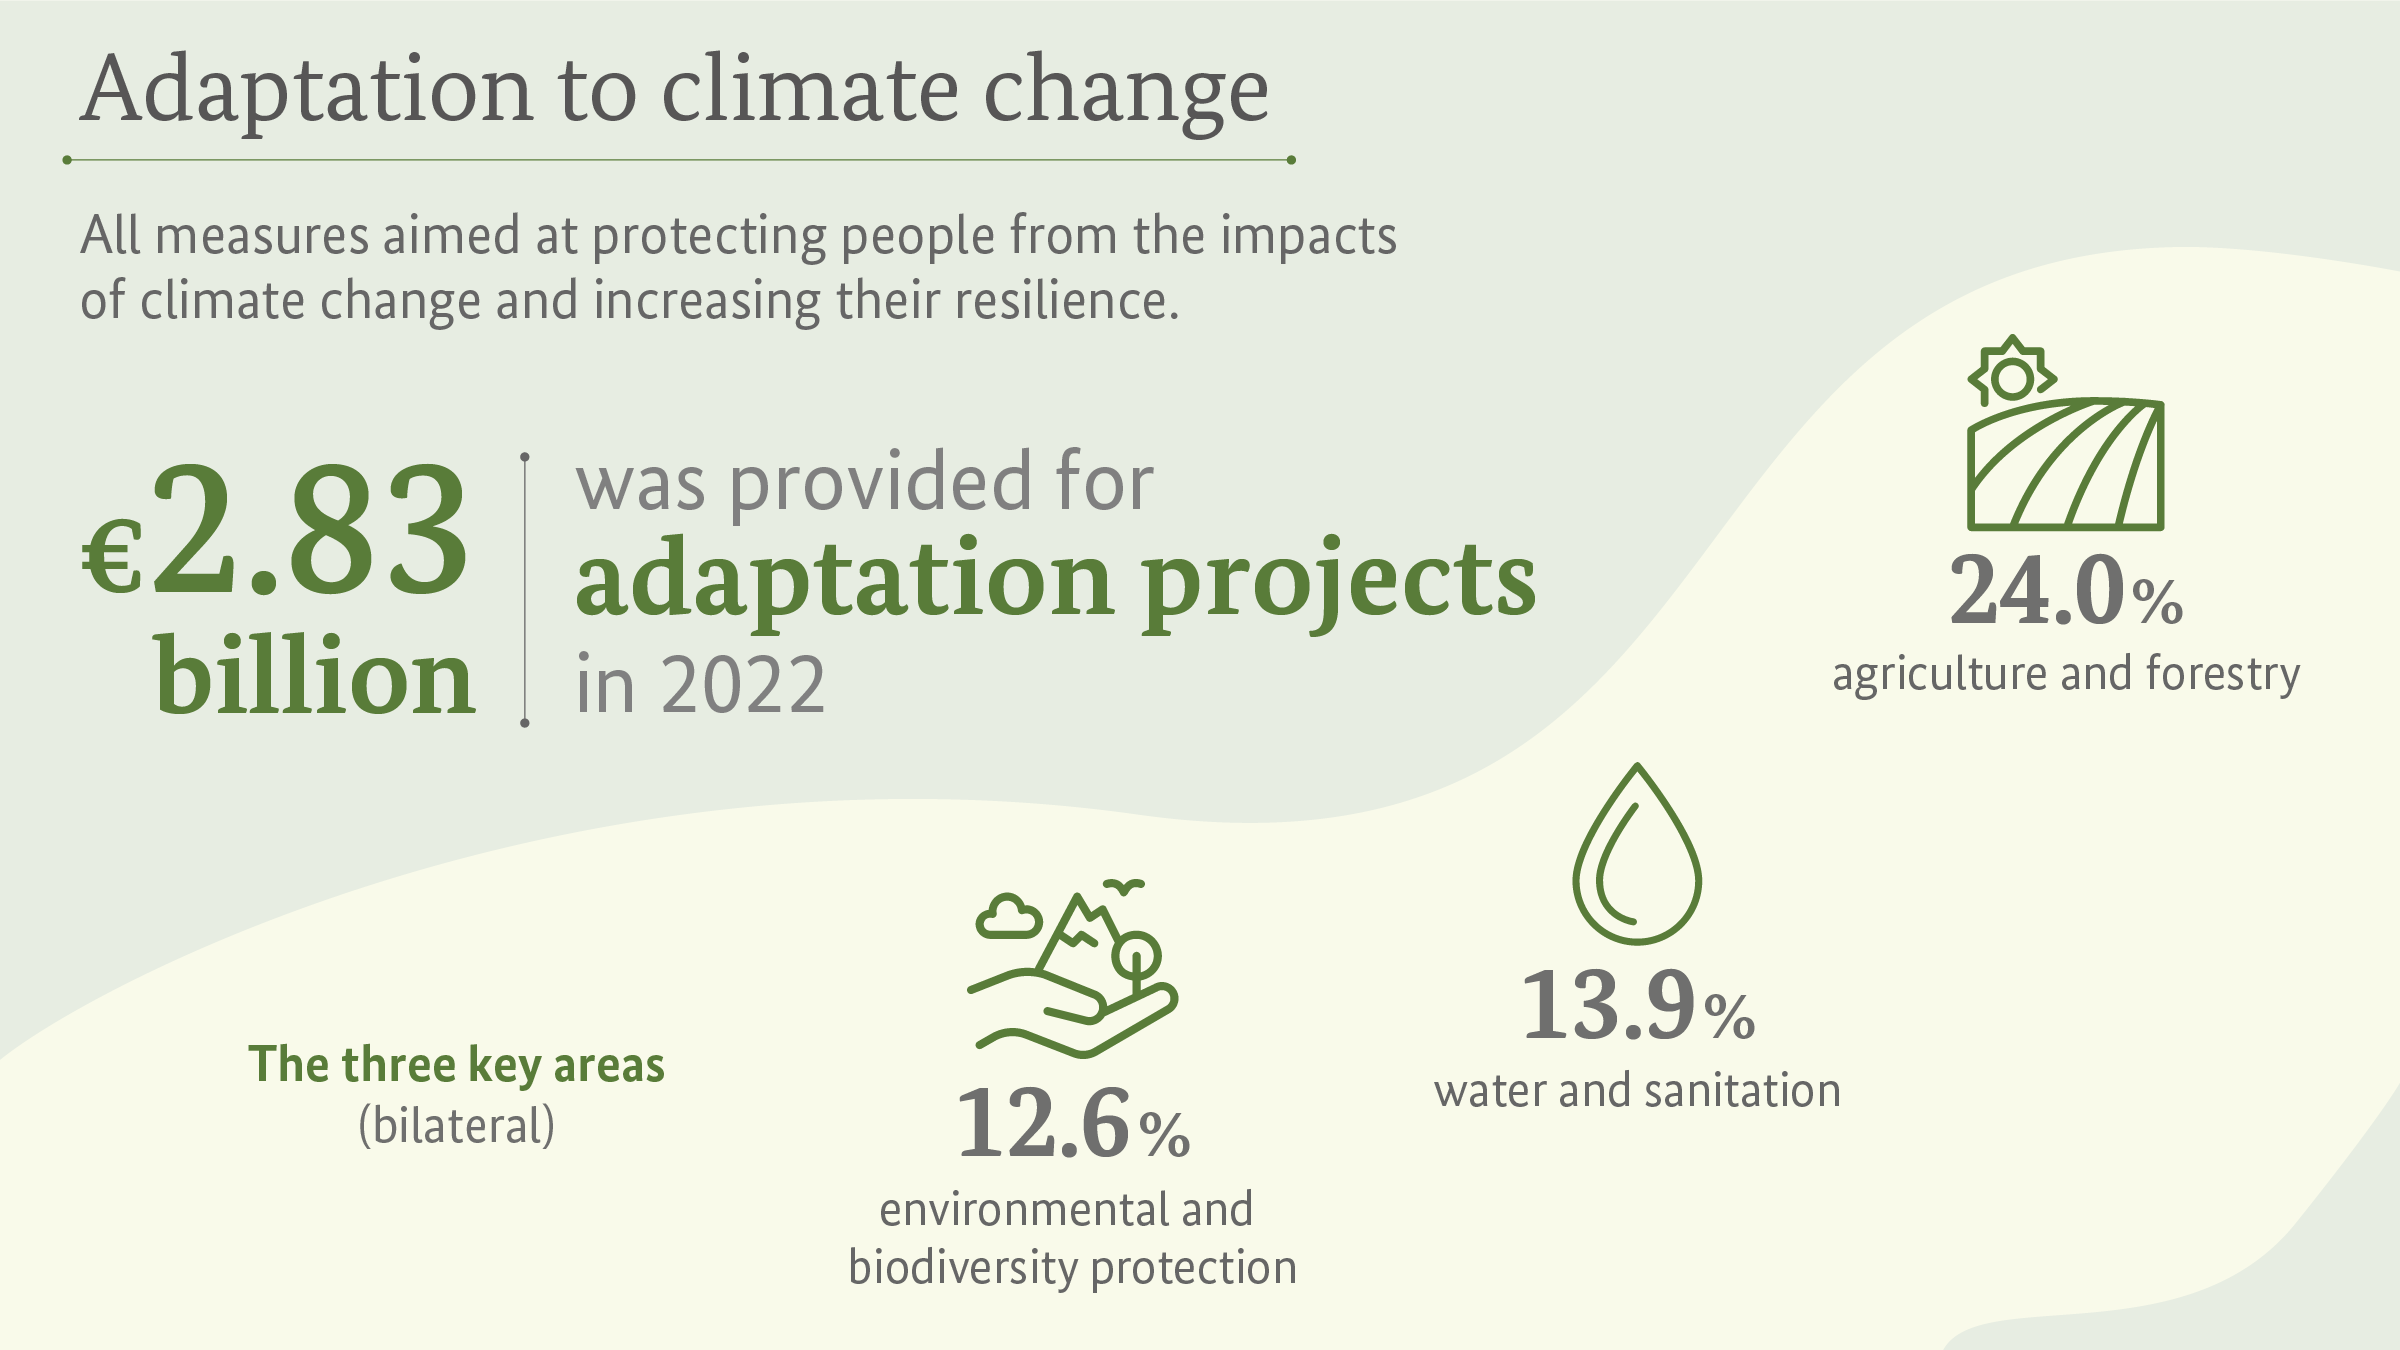 Adaptation to climate change: Climate finance goes into measures both to mitigate greenhouse gas emissions and to help countries adapt to climate change. Some climate-related projects also contribute to forest and biodiversity conservation, including REDD+. The BMZ is now also assisting selected partner countries in their efforts to harness international market mechanisms under Article 6 of the Paris Agreement